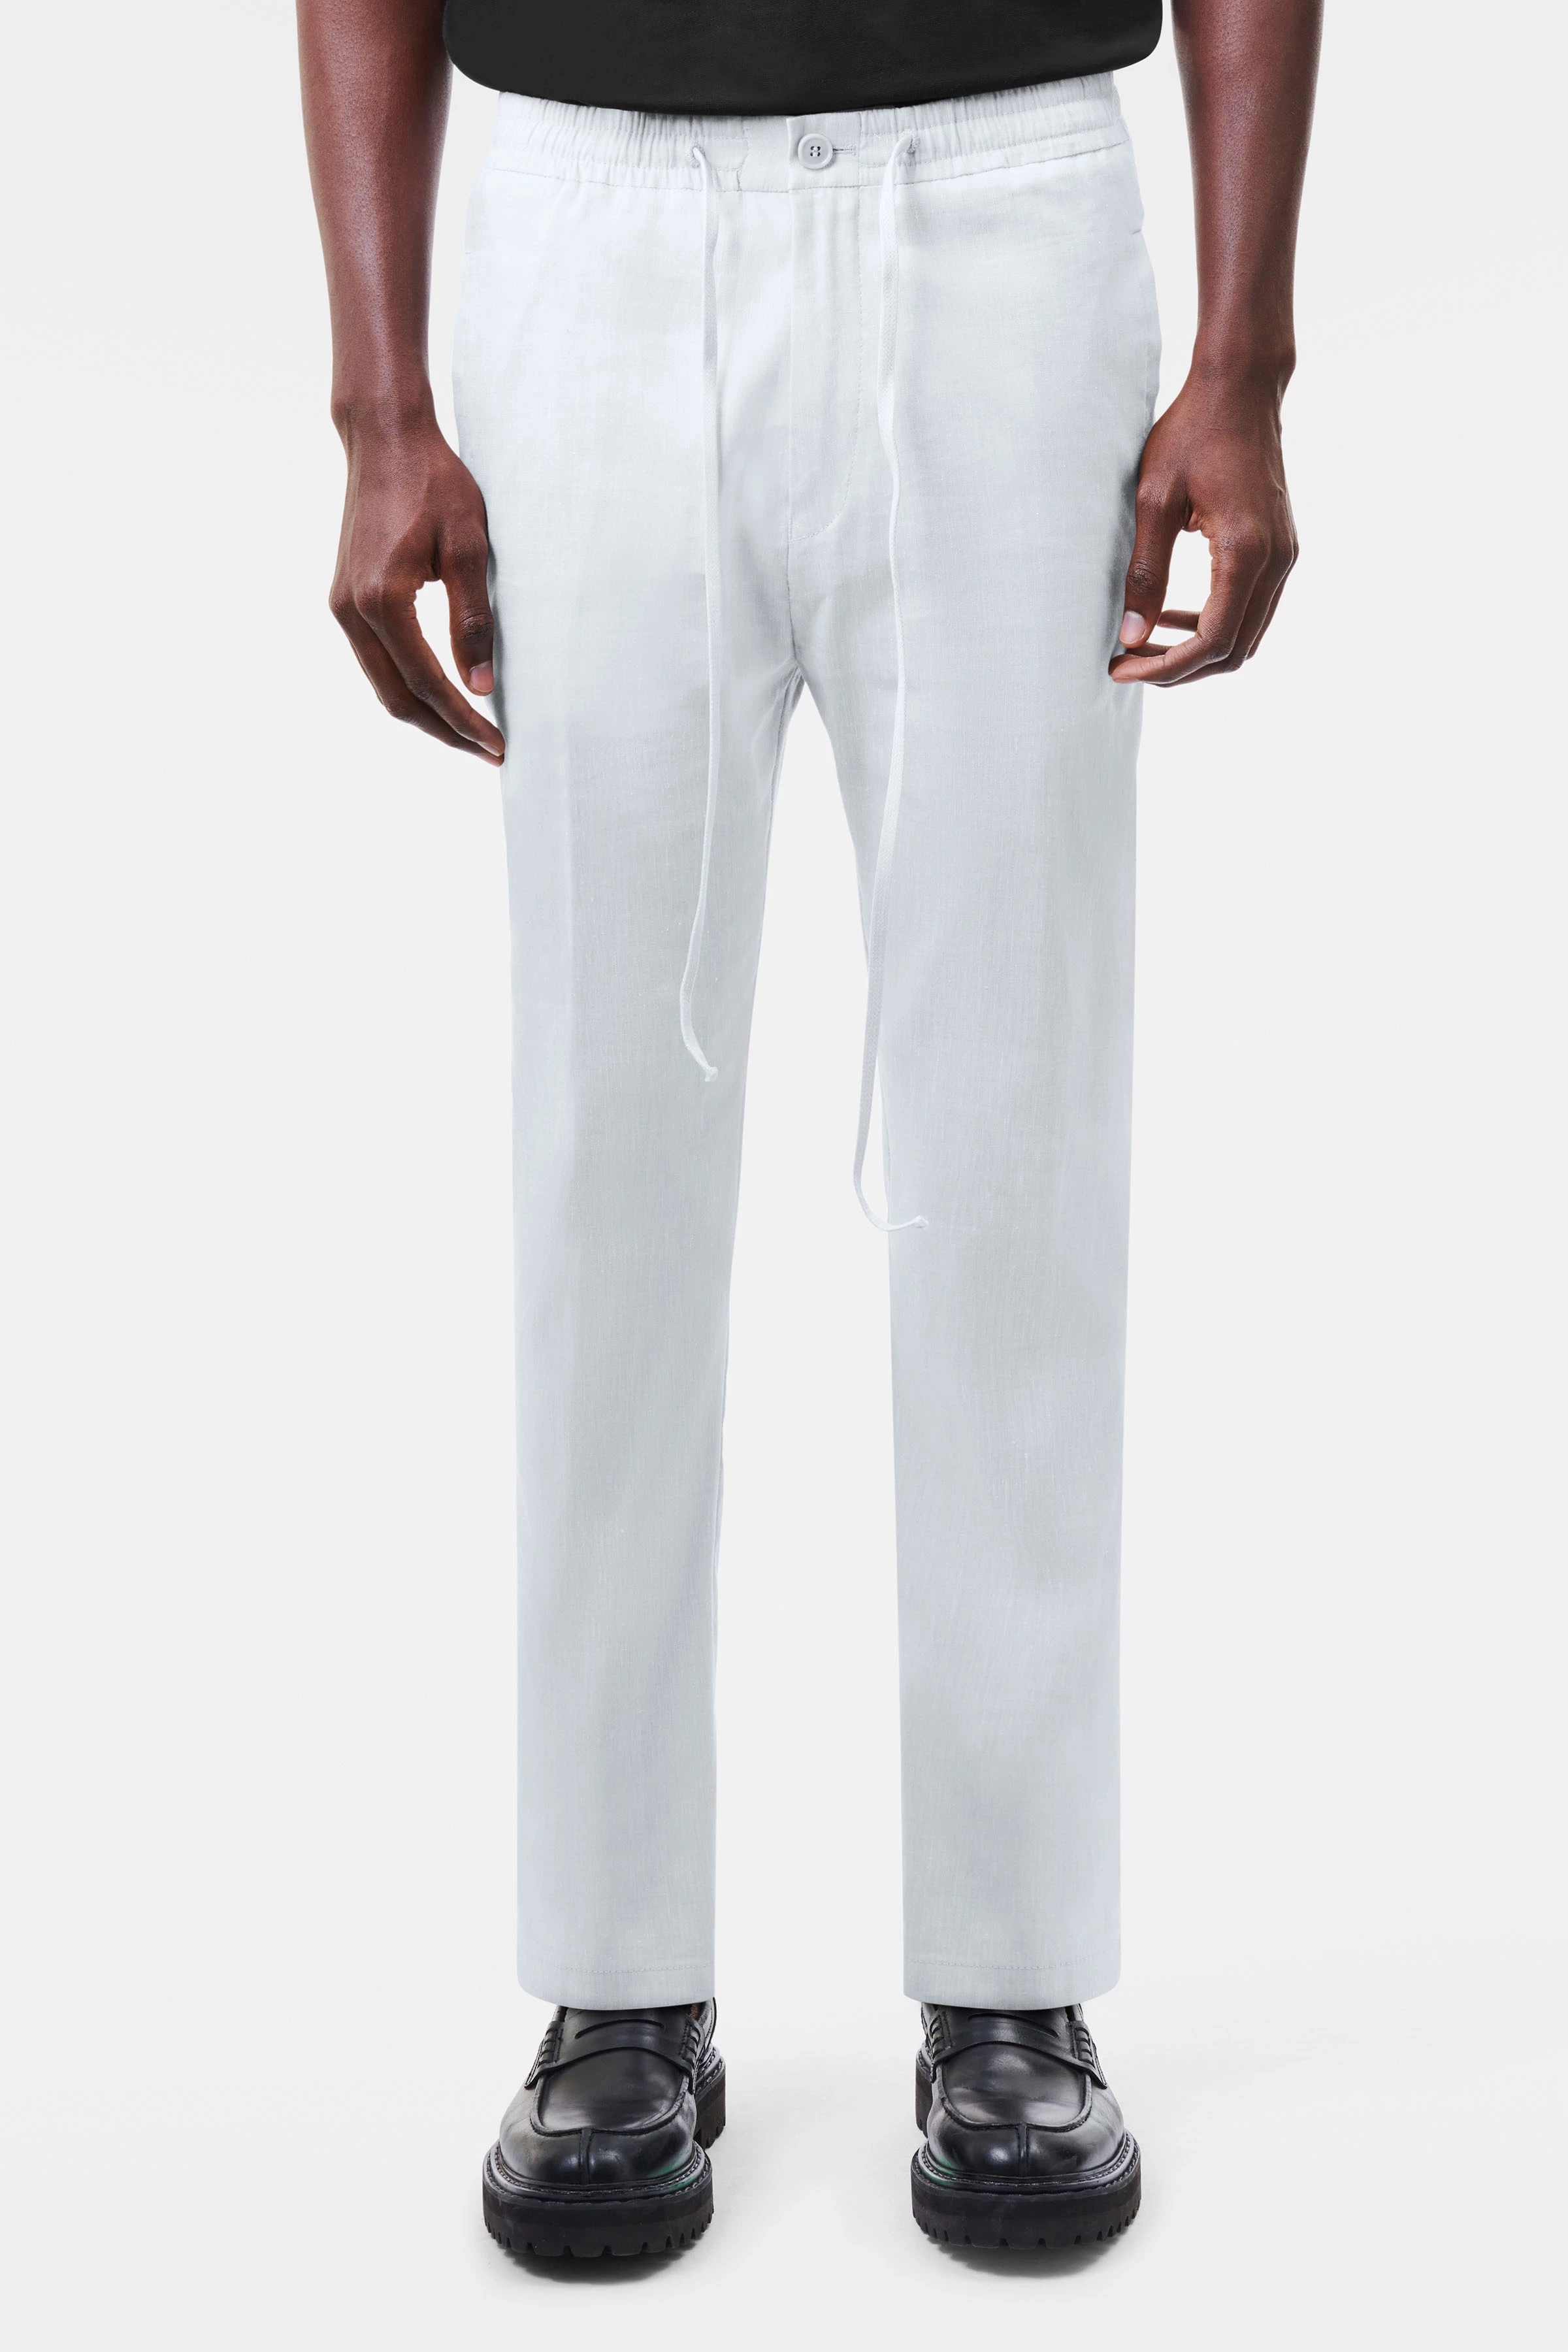 jogging trousers with drawstring in a summery linen blend JEGER online ...